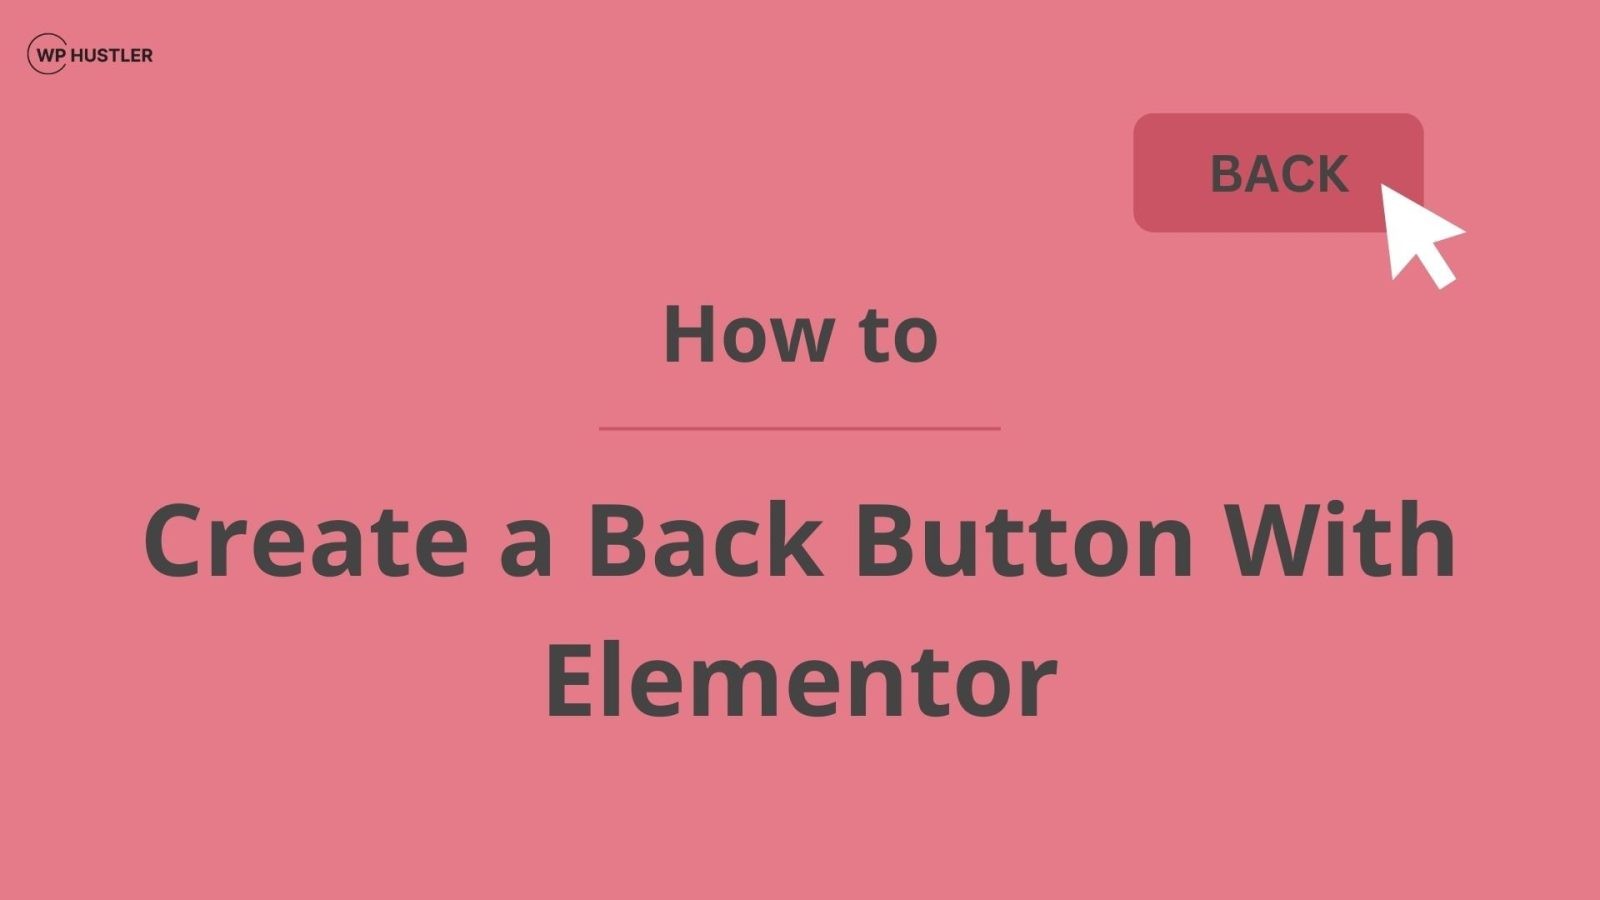 How to Create a Back Button With Elementor